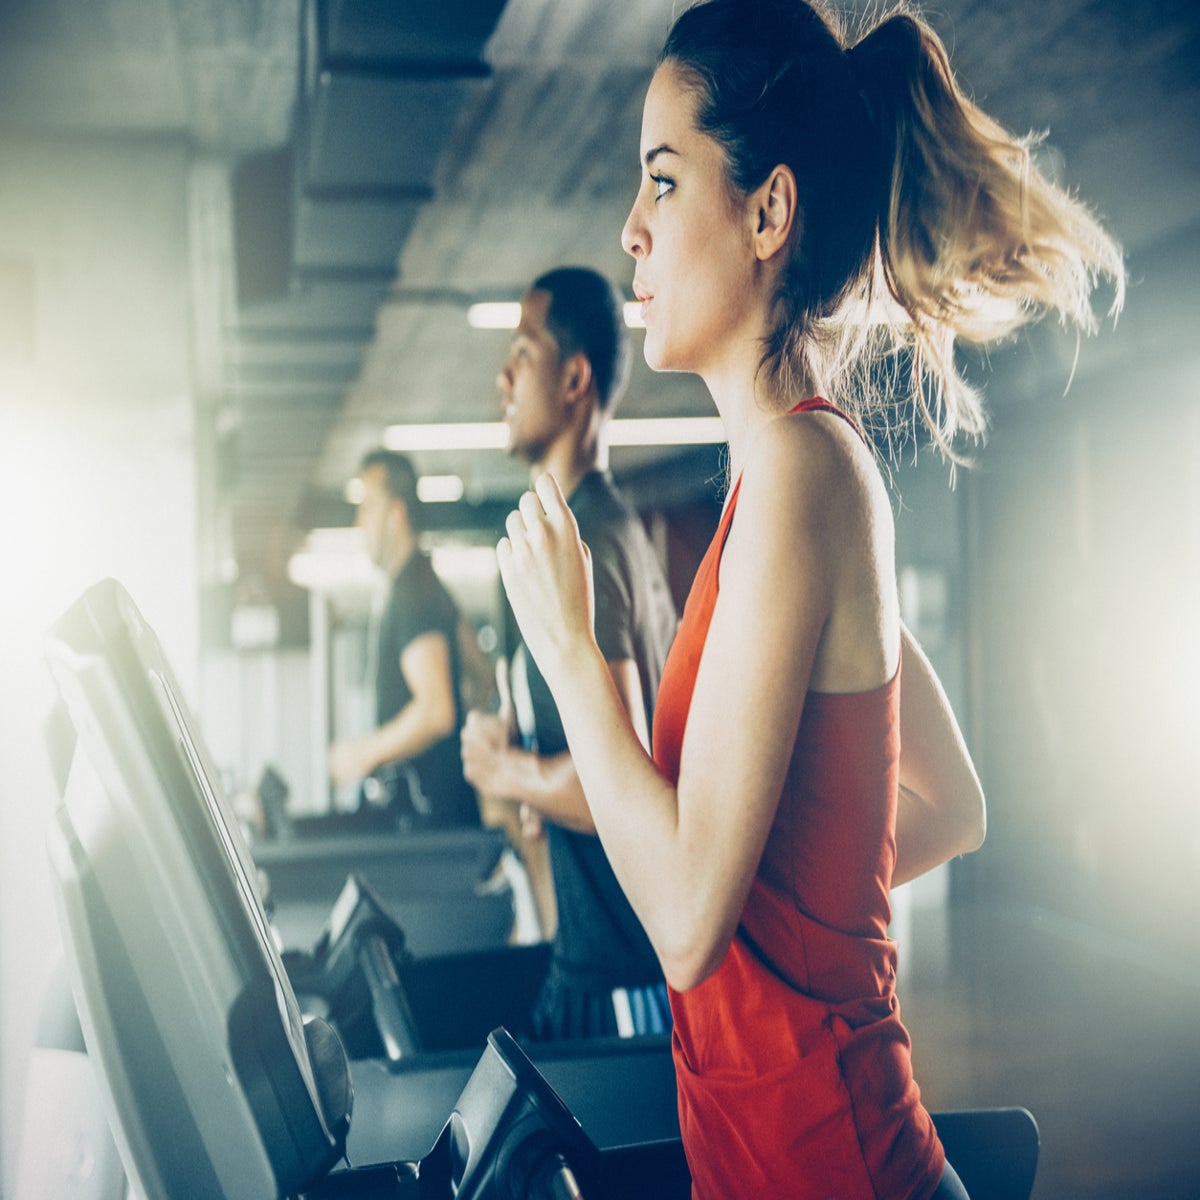 Sweatiquette: The fitness fanatic's guide to good gym manners